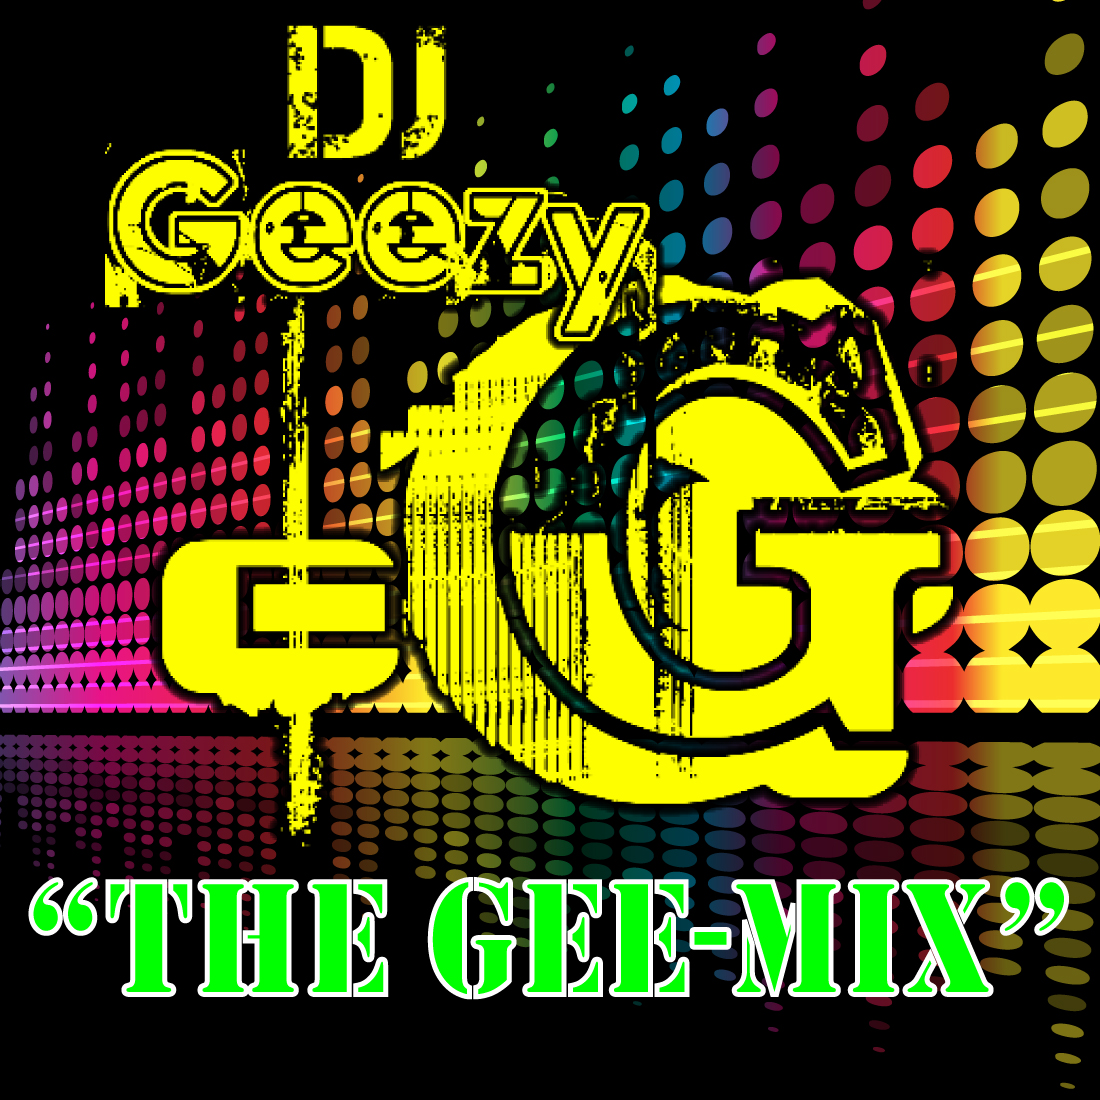 DJ GEEZY G "THE GEE-MIX" (MARCH 18, 2012) PART (II)